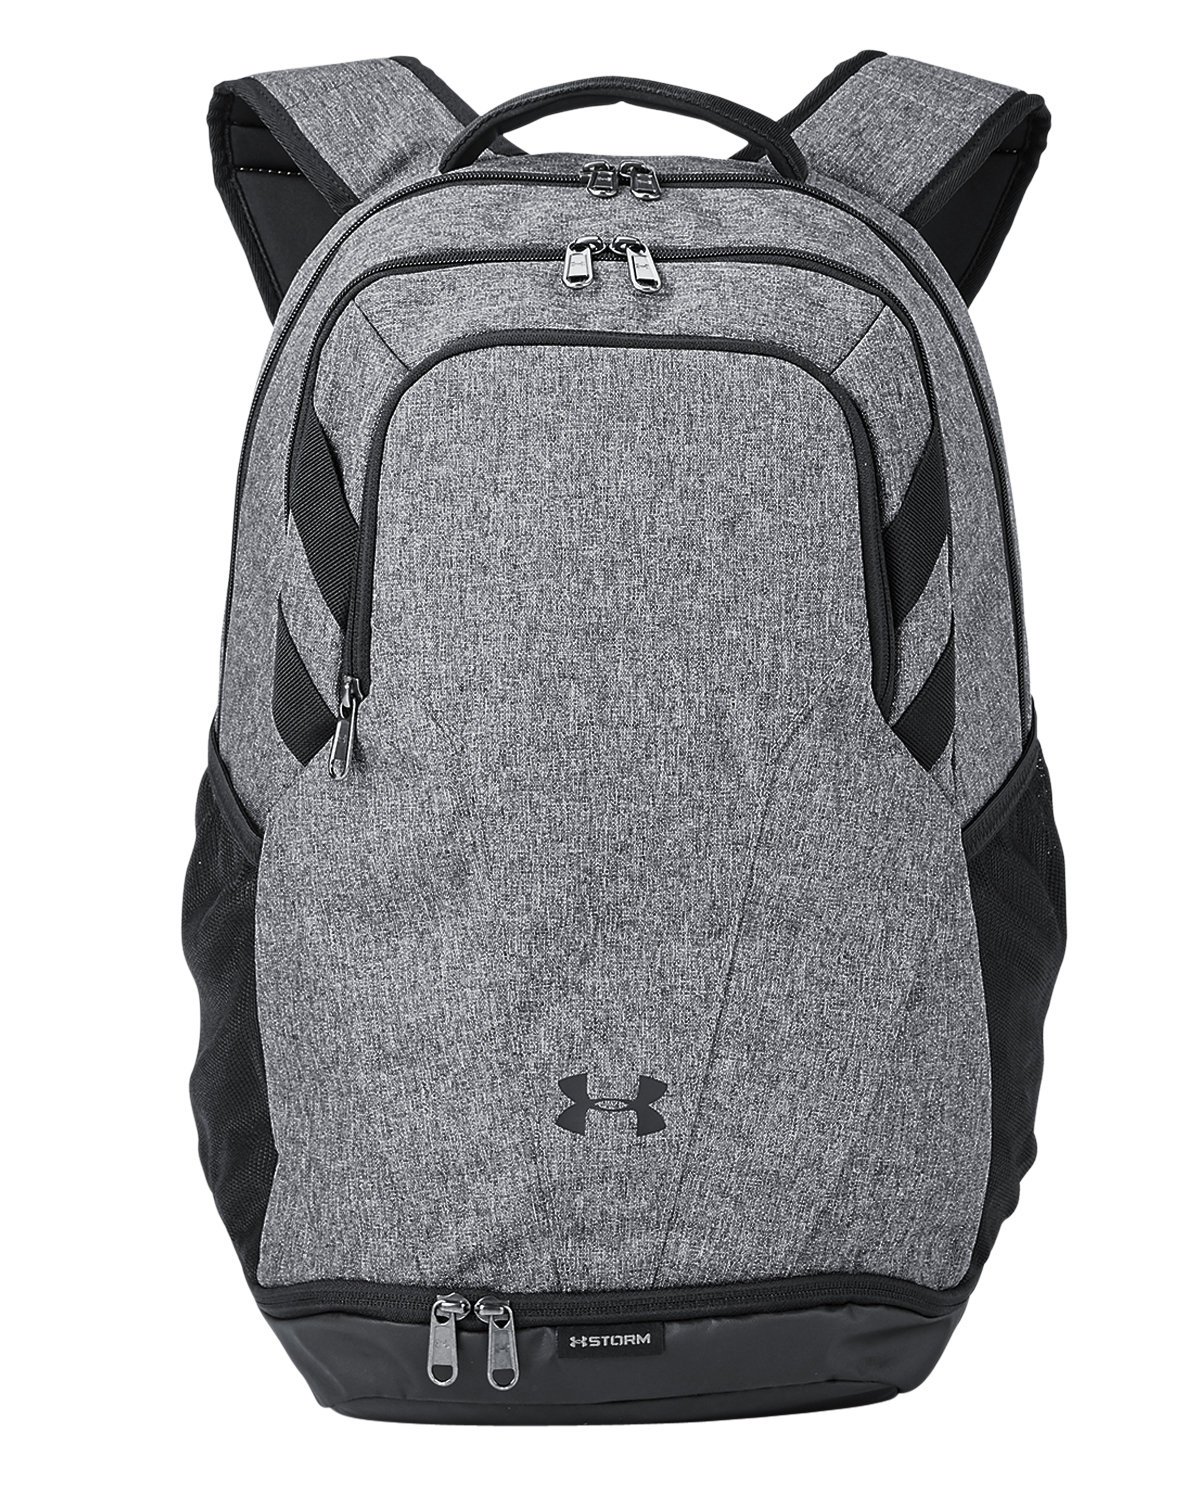 Under Armour Hustle II Backpack, Royal, One Size 